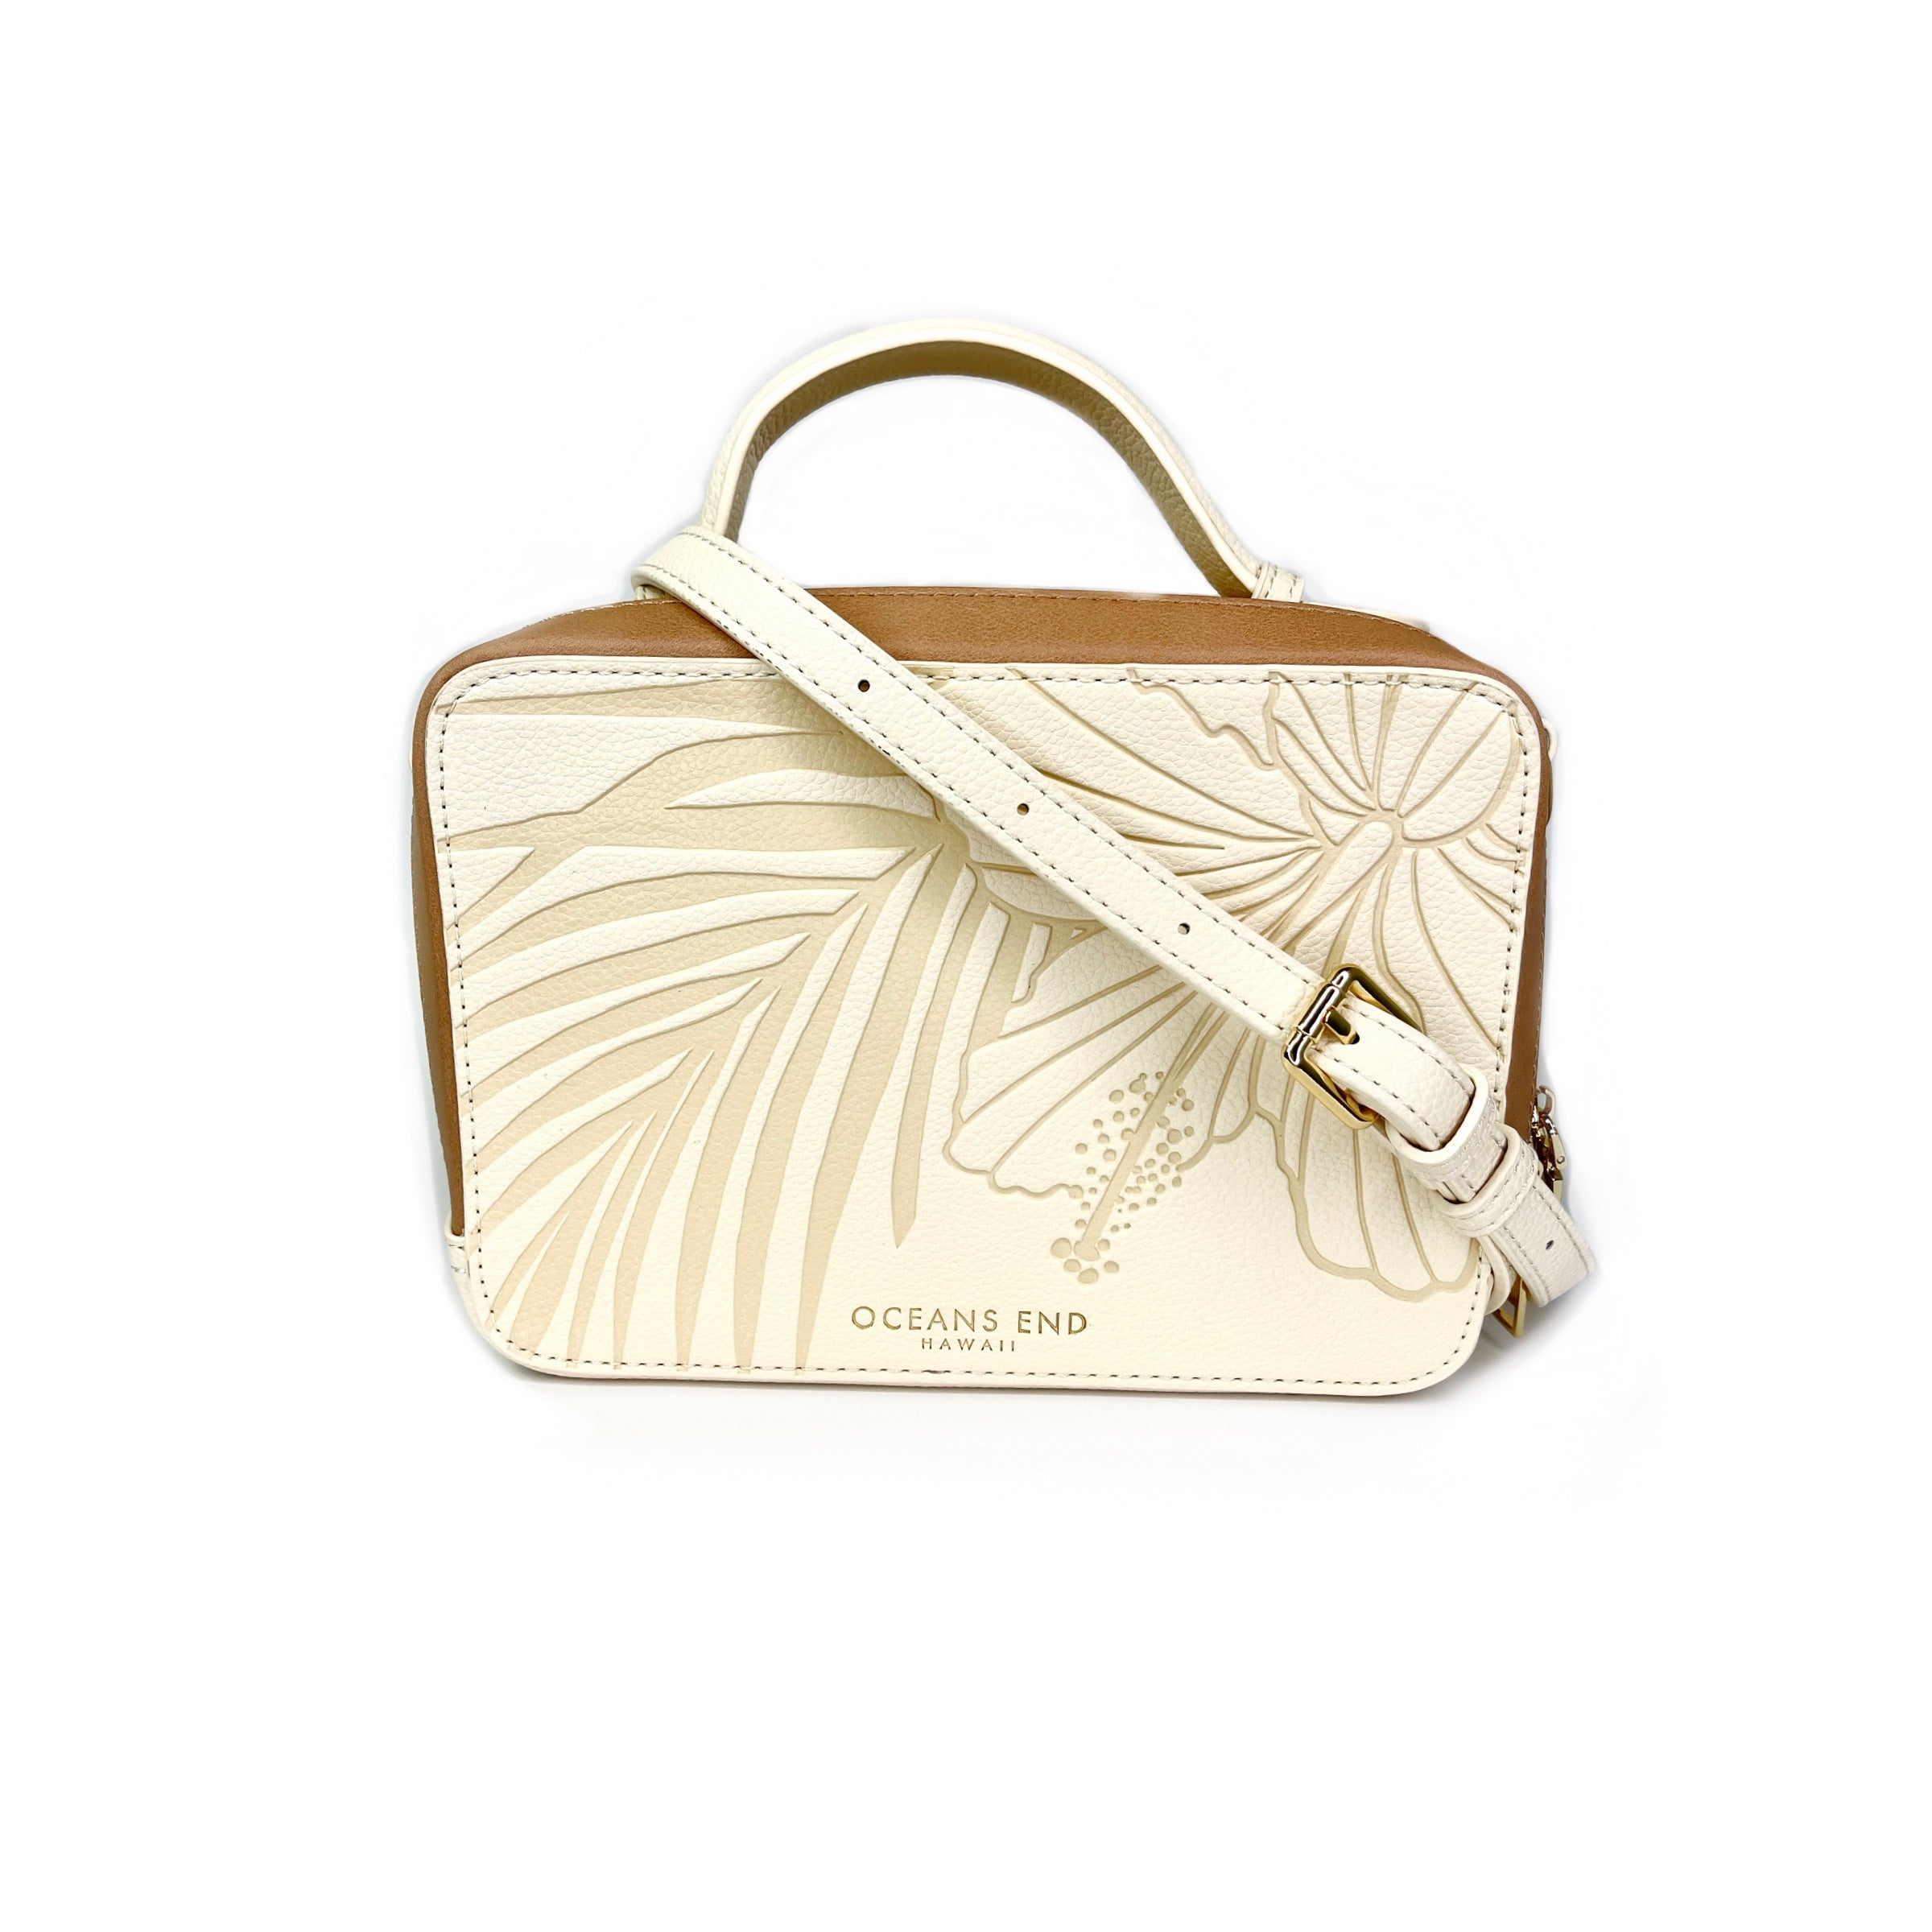 Creme crossbody camera bag with tropical flower embossed on vegan leather - Oceans End